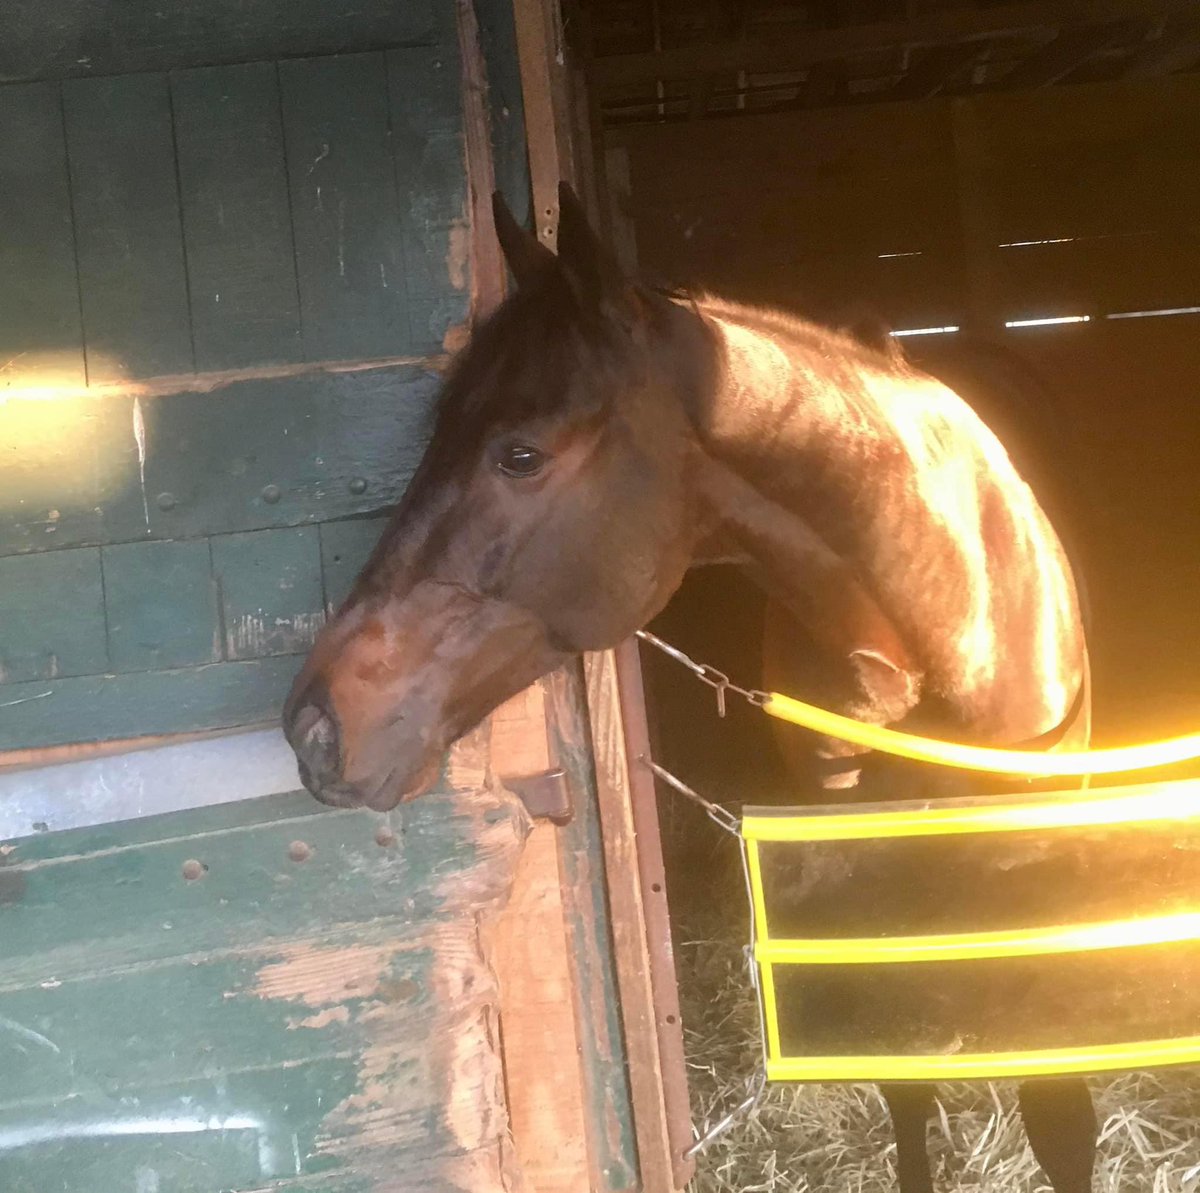 Our boy Bold Medication will be making his New York debut at @TheNYRA Aqueduct on Friday, February 23rd with jockey @trevormmccarthy riding. It is race 6 and post time is 3:55. Our trainer @WPottsRacing and his team will have him ready to go! Let’s get lucky! 🏇🏇